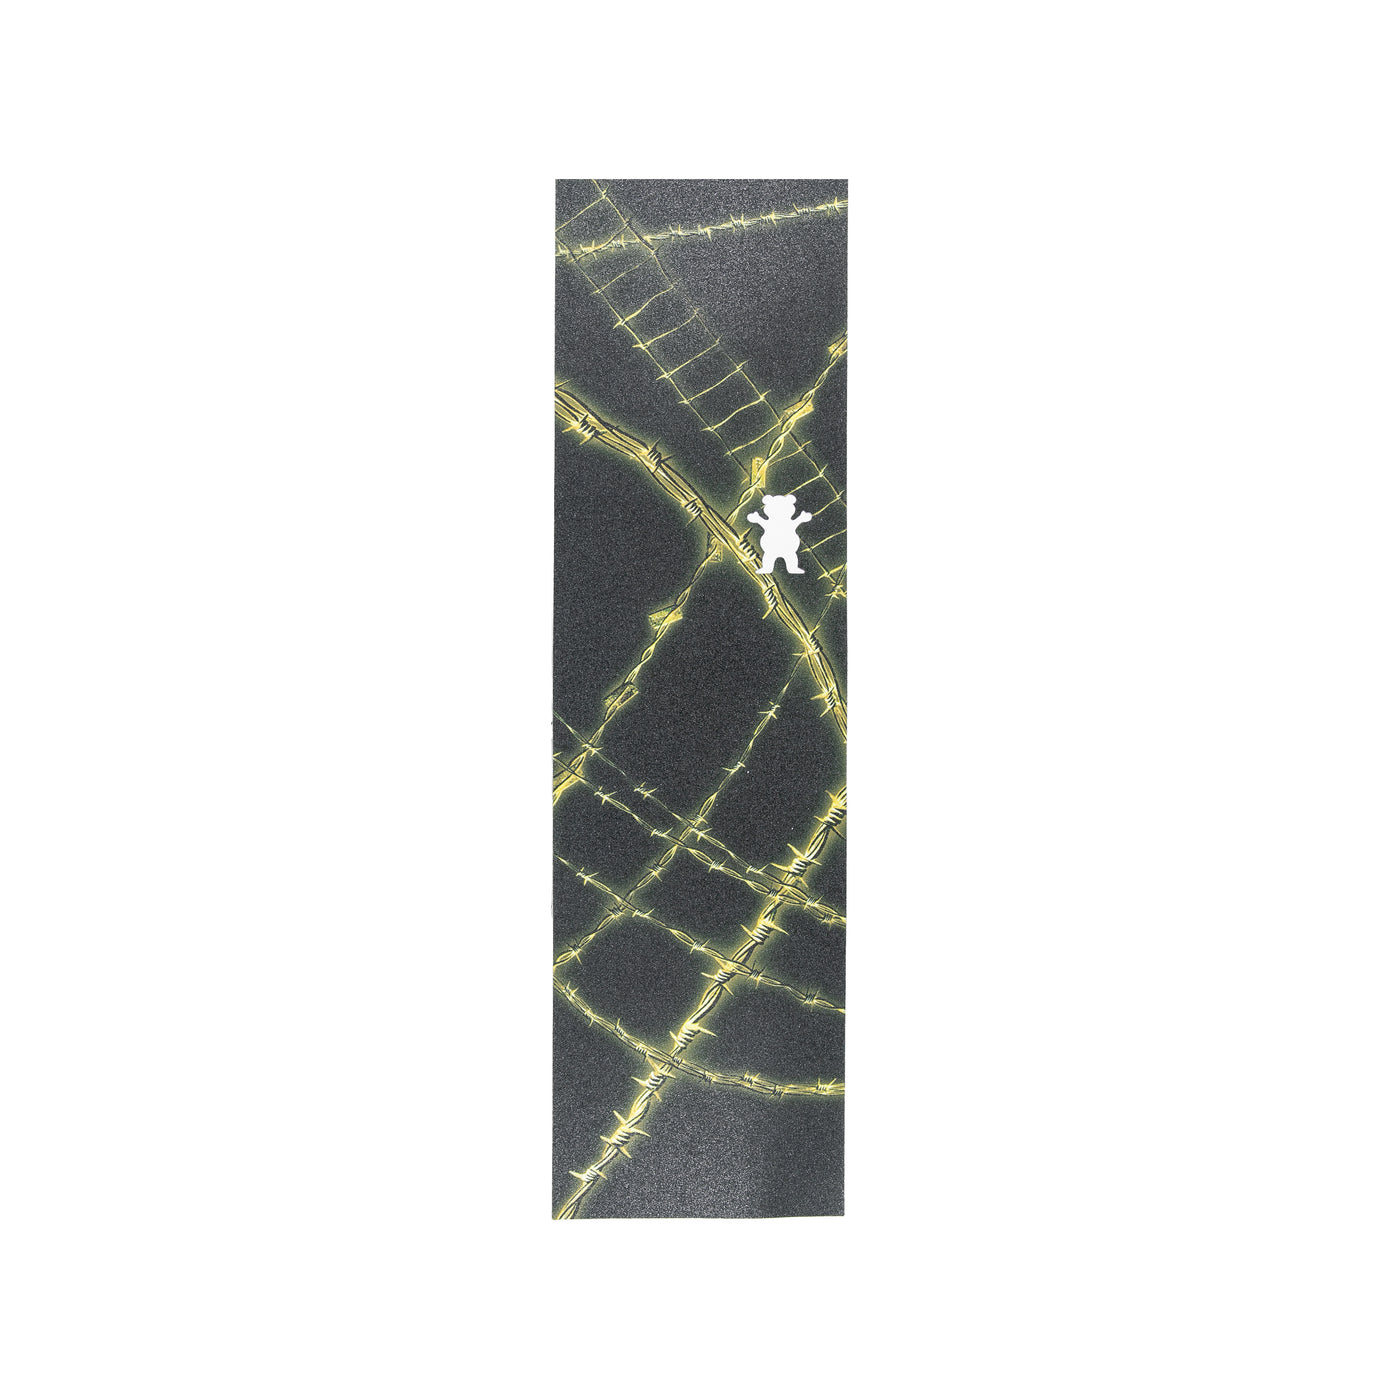 Live Wire Griptape Sheet - Yellow